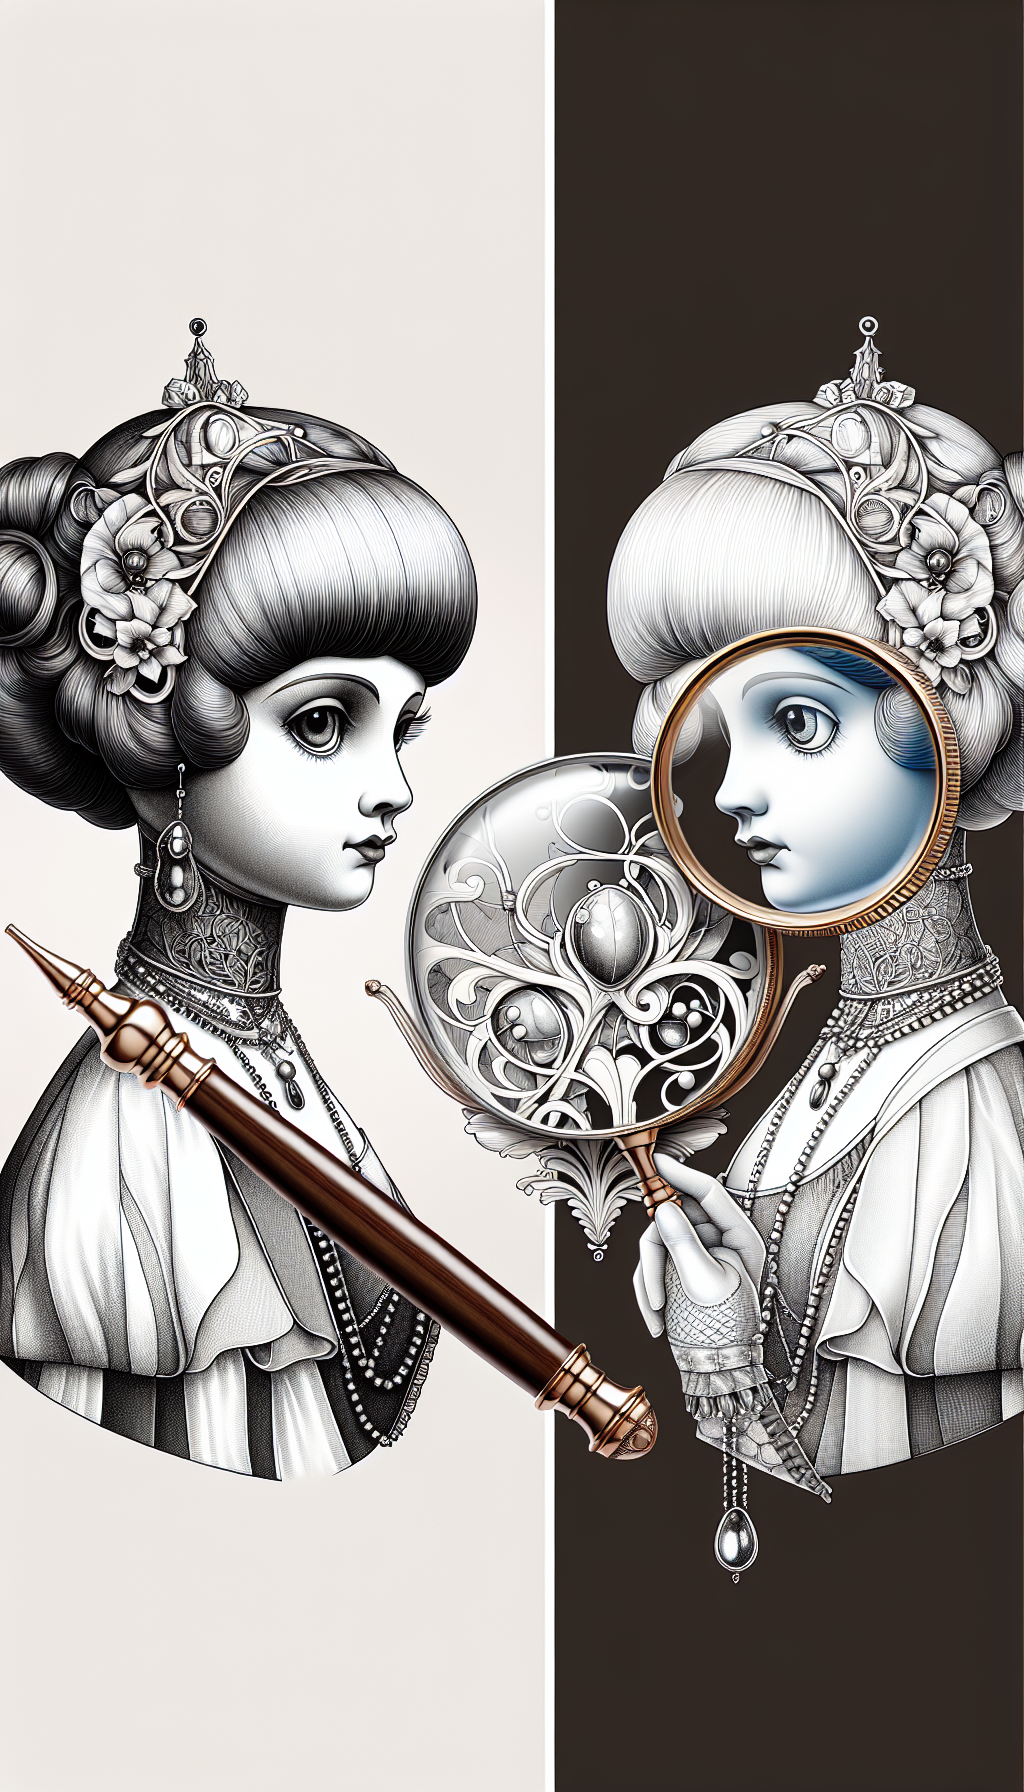 An intricate illustration showcasing a magnifying glass poised over a delicately featured, classic 1800s-style porcelain doll. The doll's face embodies the era's aesthetic, while segments of the illustration transition into different art styles, such as Art Nouveau for the clothes and Art Deco for the accessories, highlighting the timeless value and key traits of antique dolls from the 1800s to the 1920s.